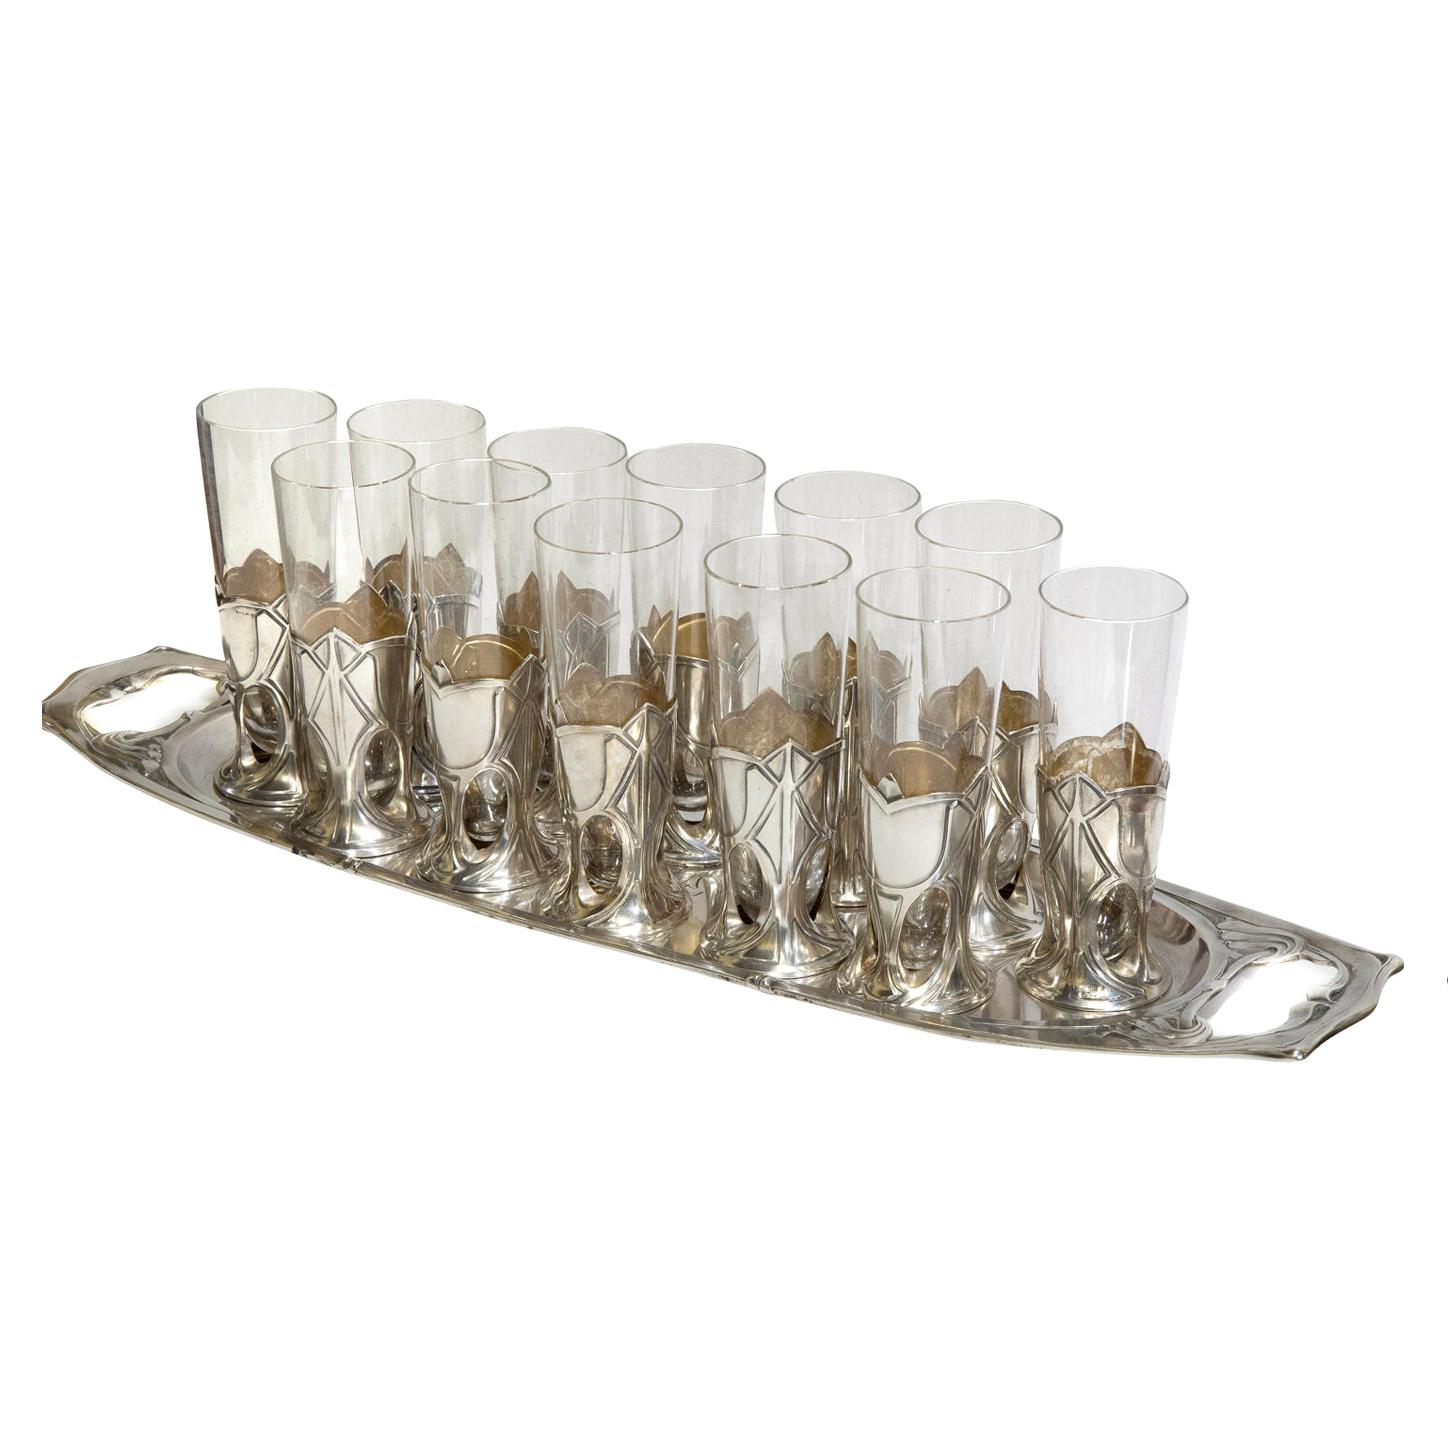 Set of 12 Art Nouveau Champagne Flutes in Silver Frames, circa 1890 For Sale